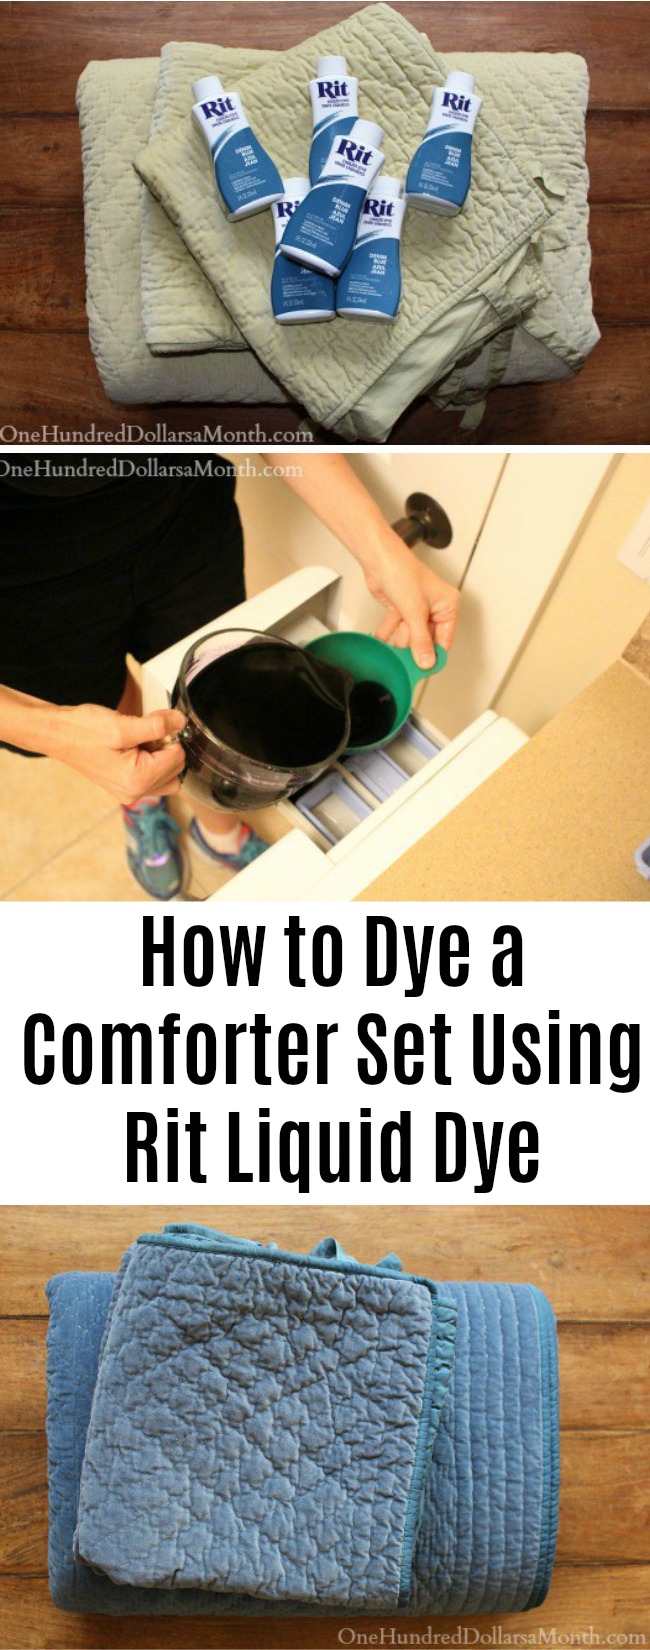 How to Dye a Comforter Set Using a Front Load Washing Machine and Rit Liquid Dye